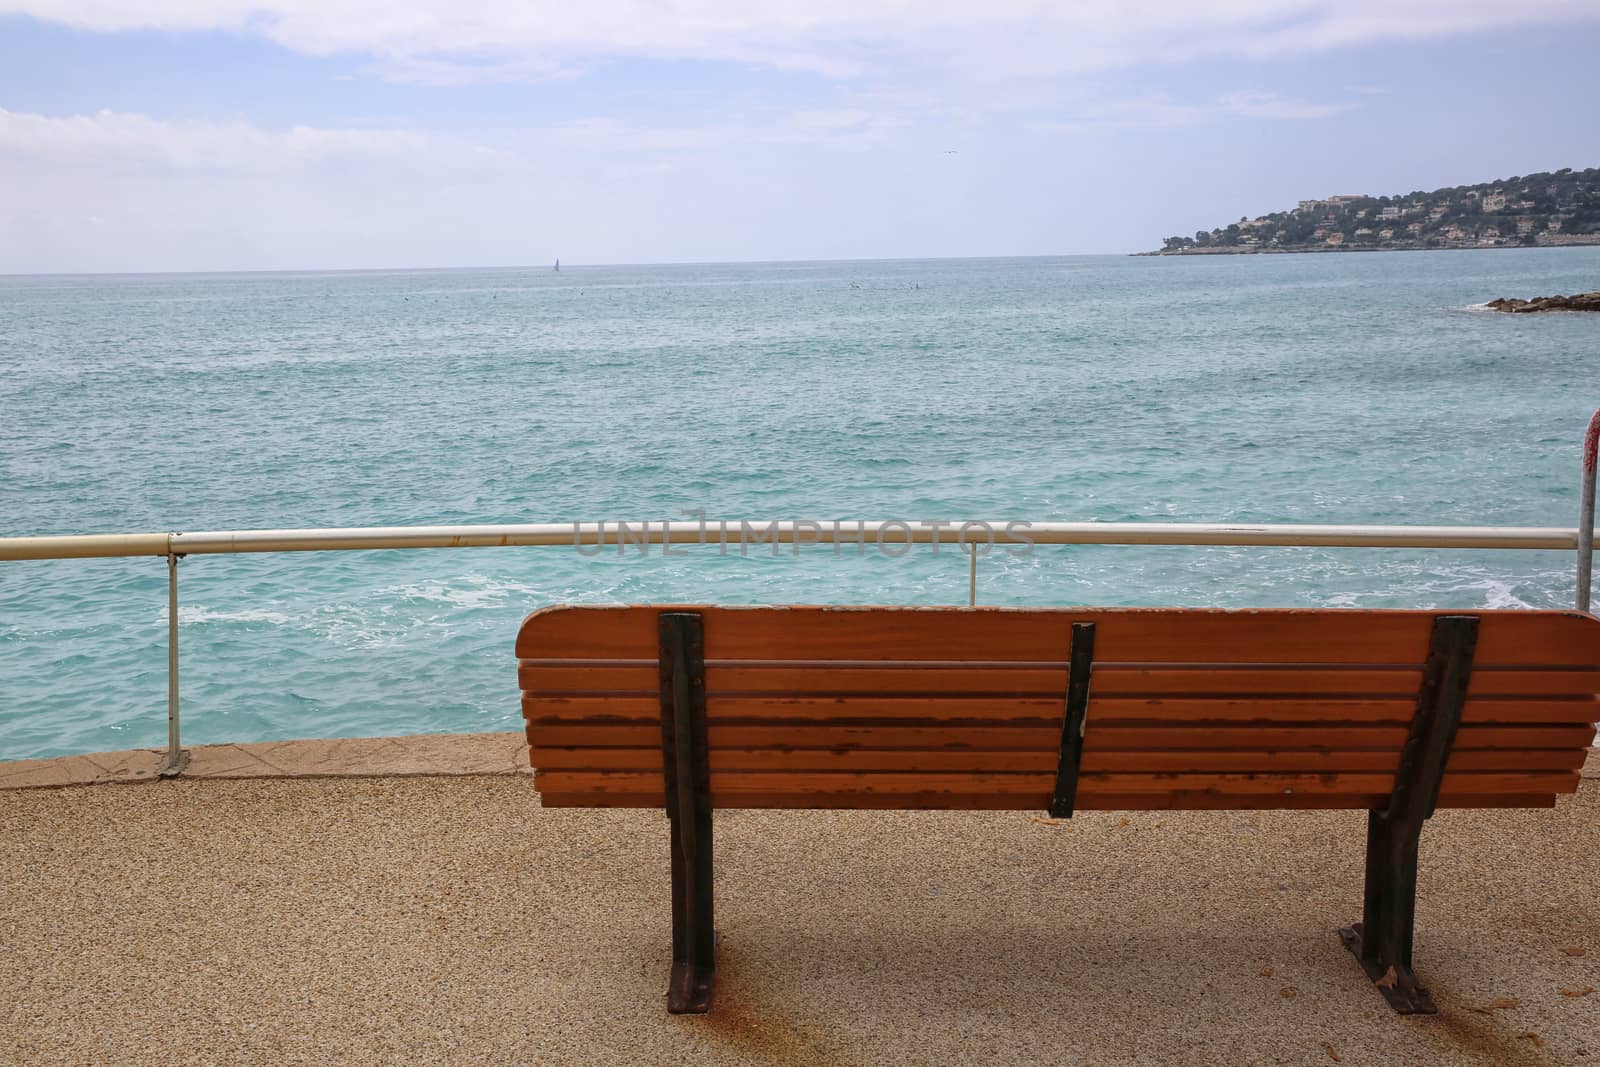 Bench By The Sea by bensib